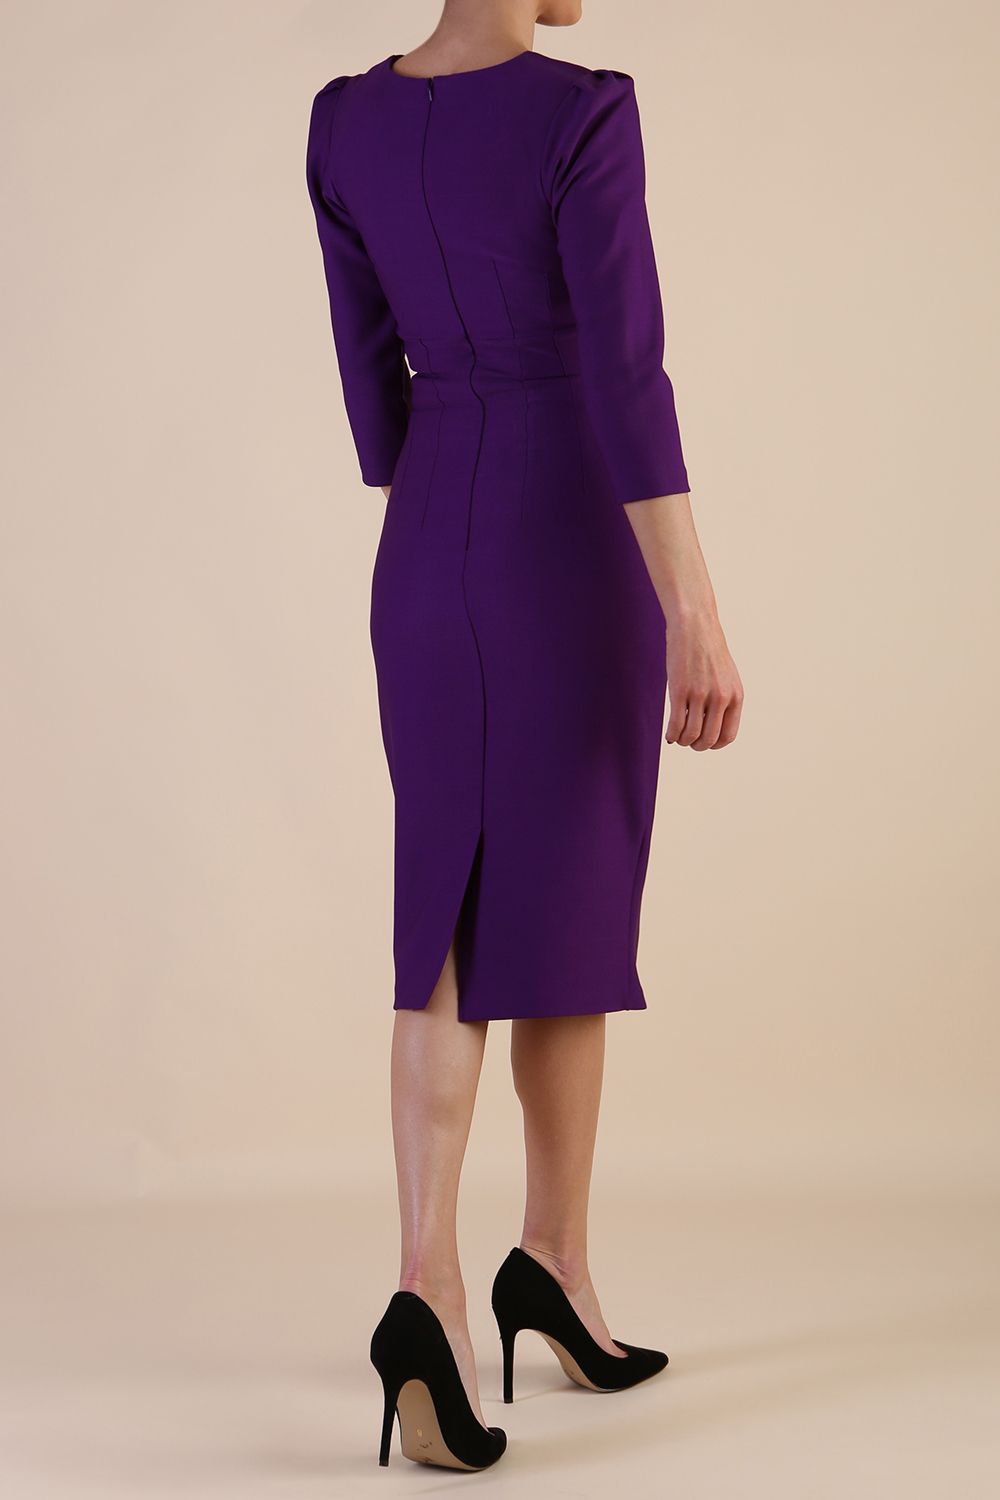 model is wearing diva catwalk seed fitzrovia sleeved pencil dress in imperial purple front